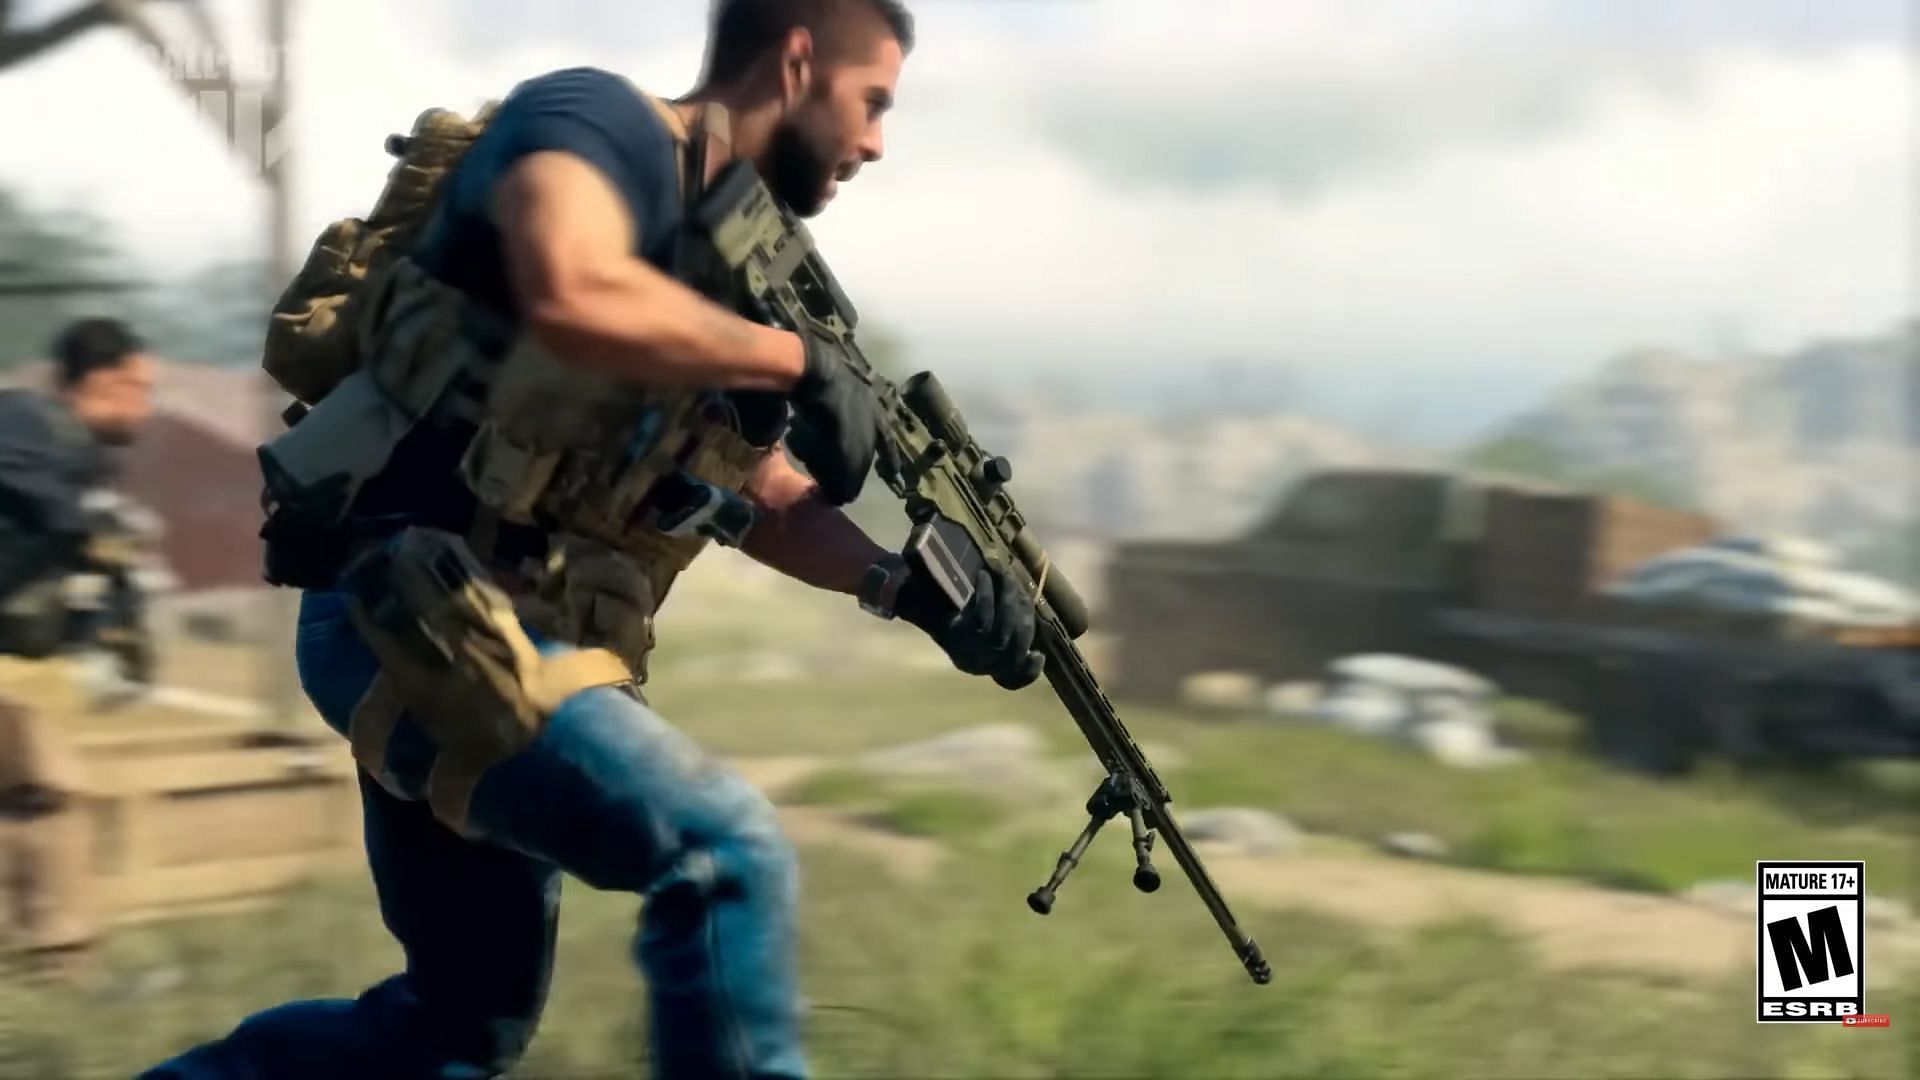 Remington MSR in the hands of Soap in Modern Warfare 2 (Image via Activision)